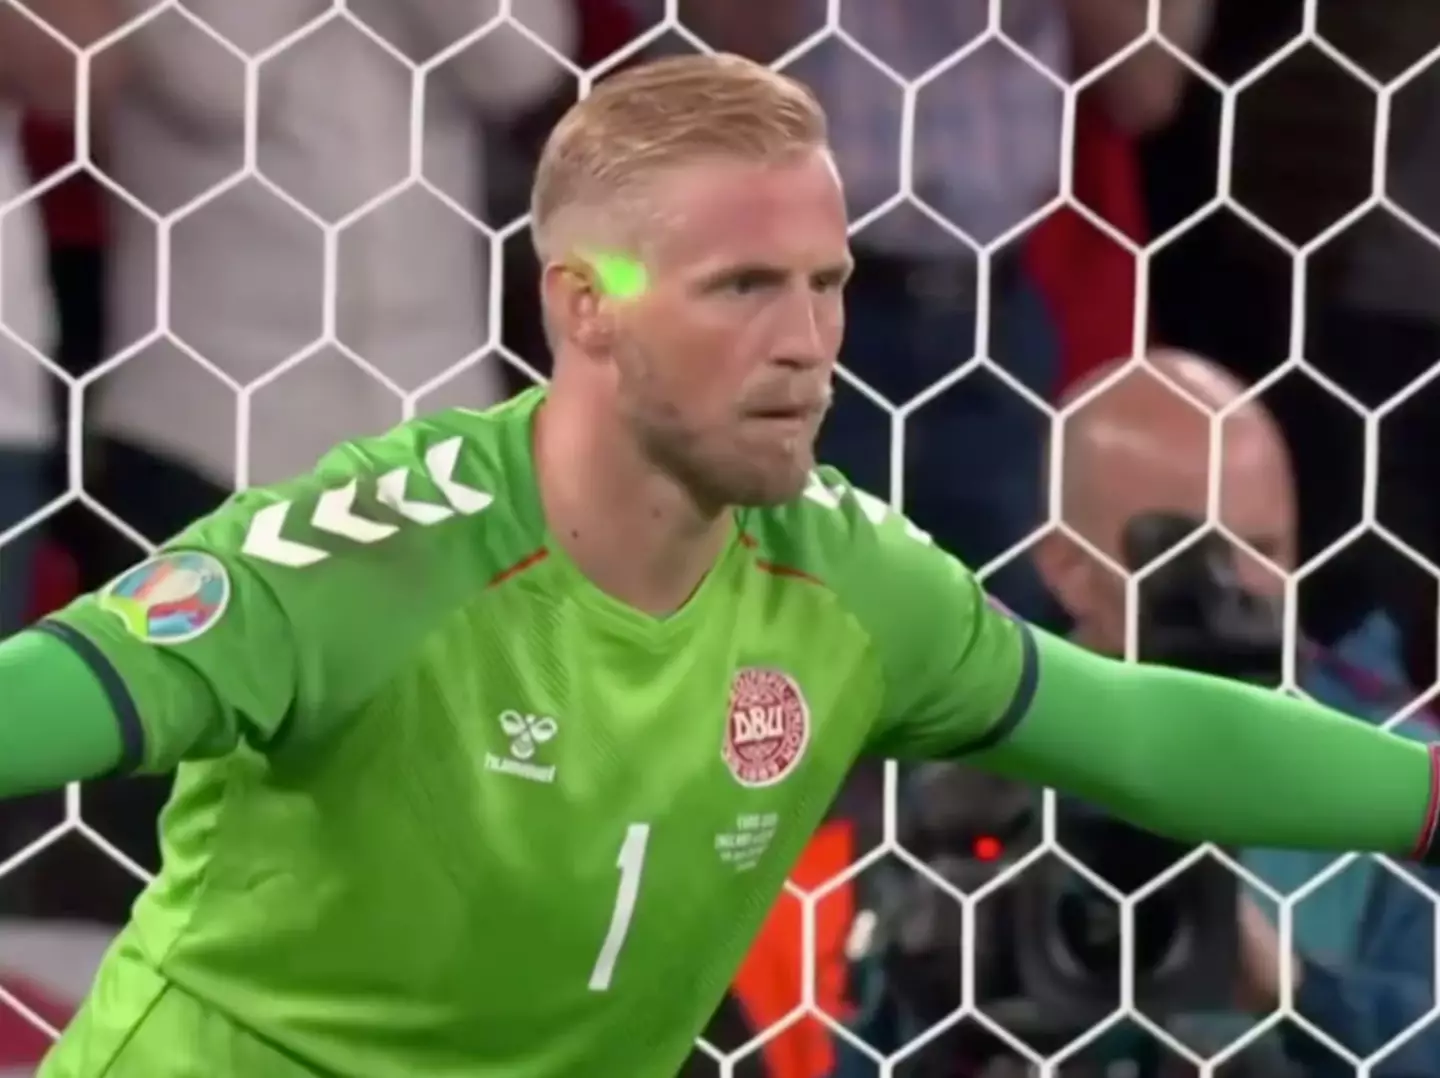 Someone tried shining a laser pointer into Kasper Schmeichel's face last time. (ITV)